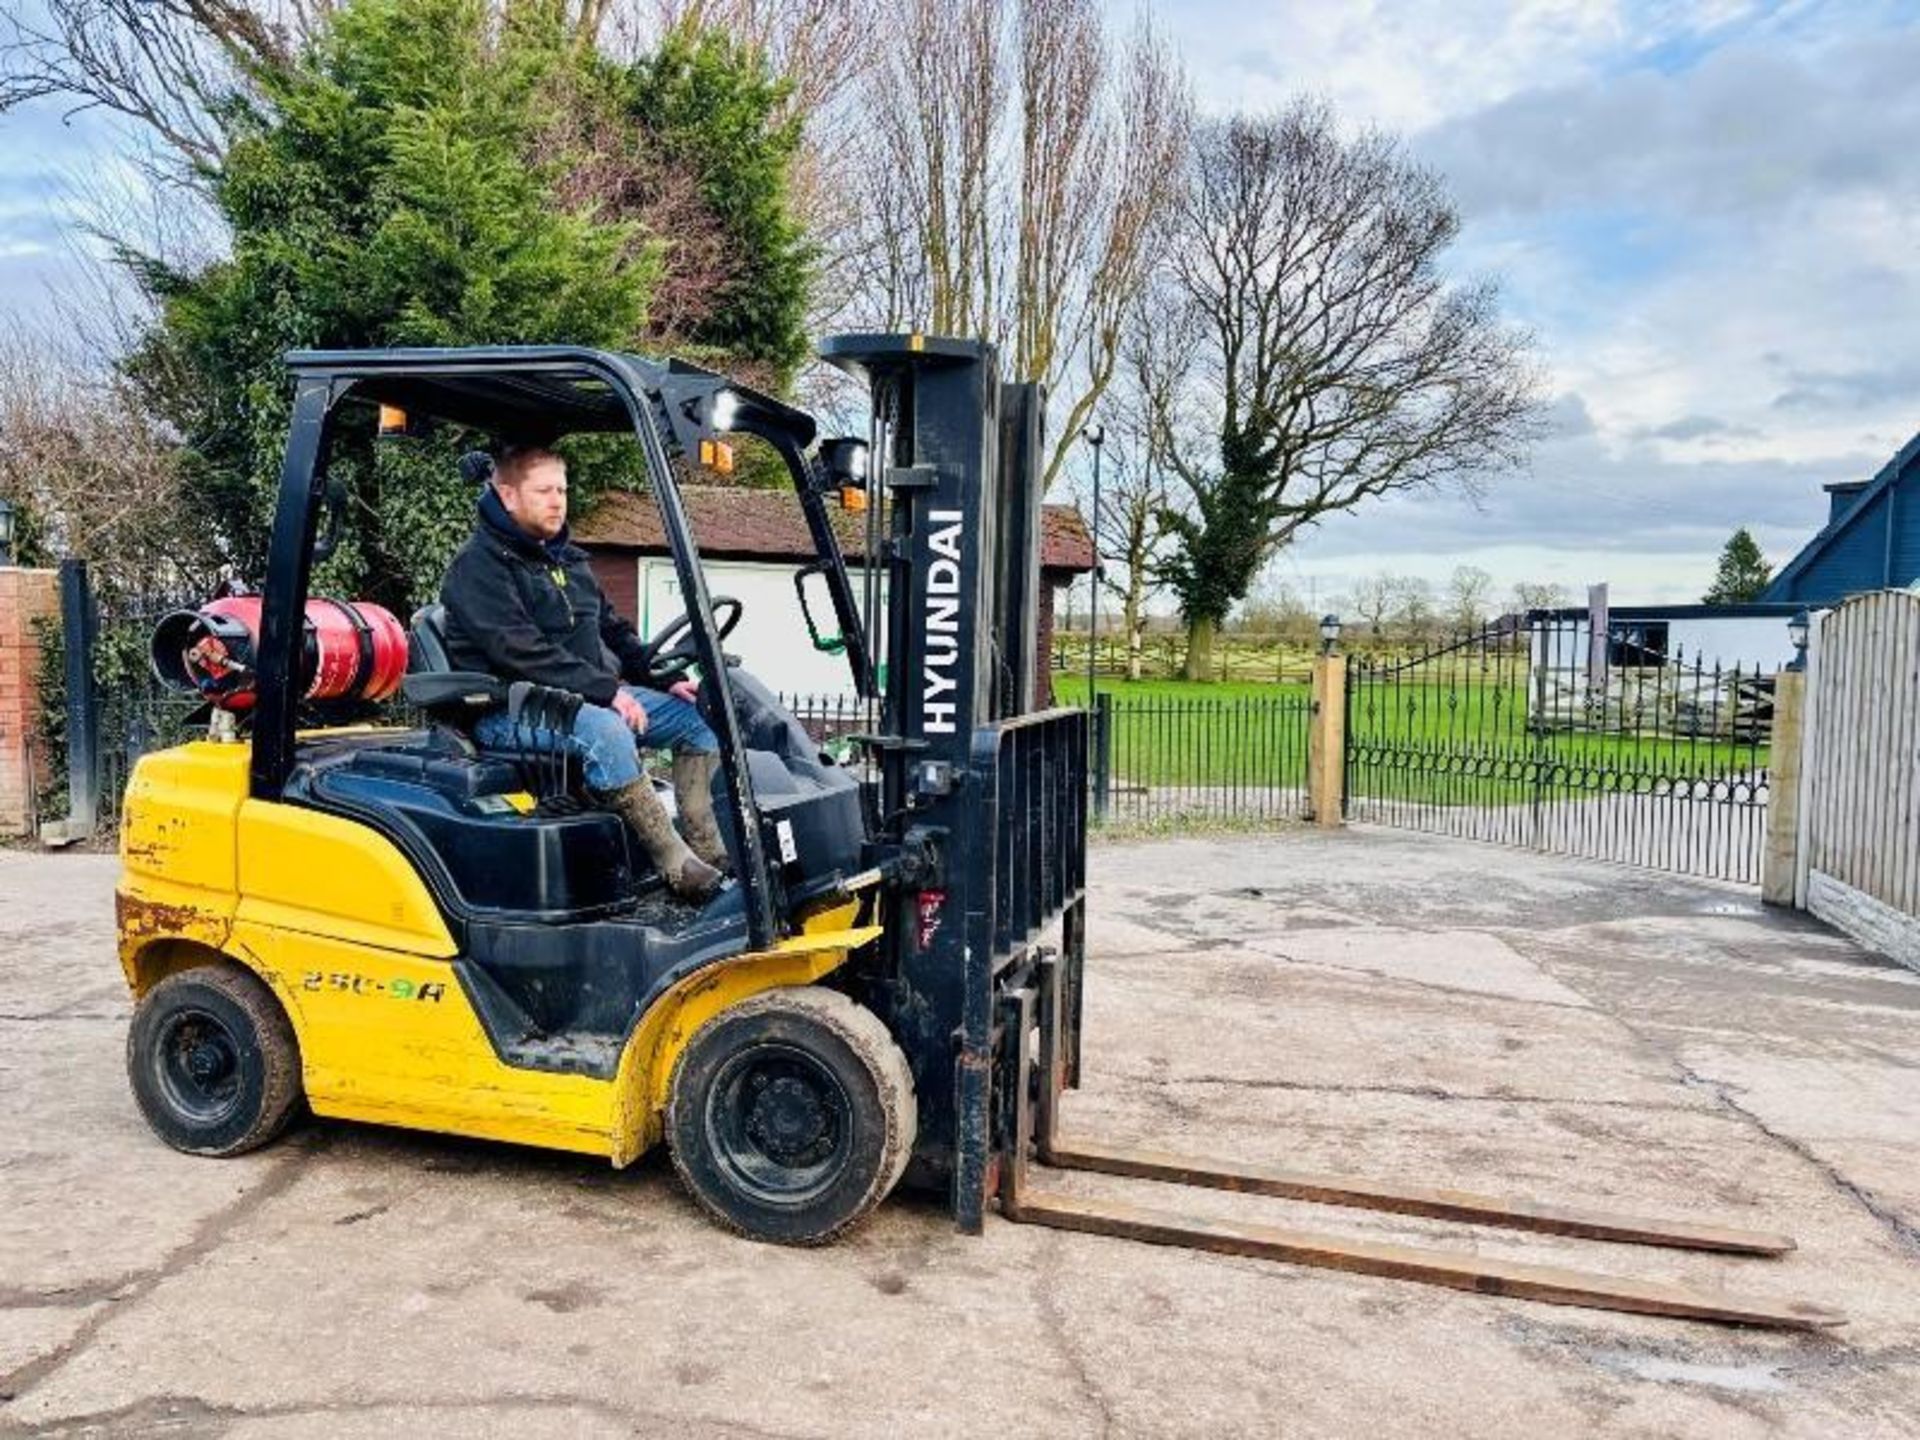 HYUNDAI 25L-9A CONTAINER SPEC FORKLIFT *YEAR 2017, 4463 HOURS* C/W PALLET TINES - Image 3 of 18